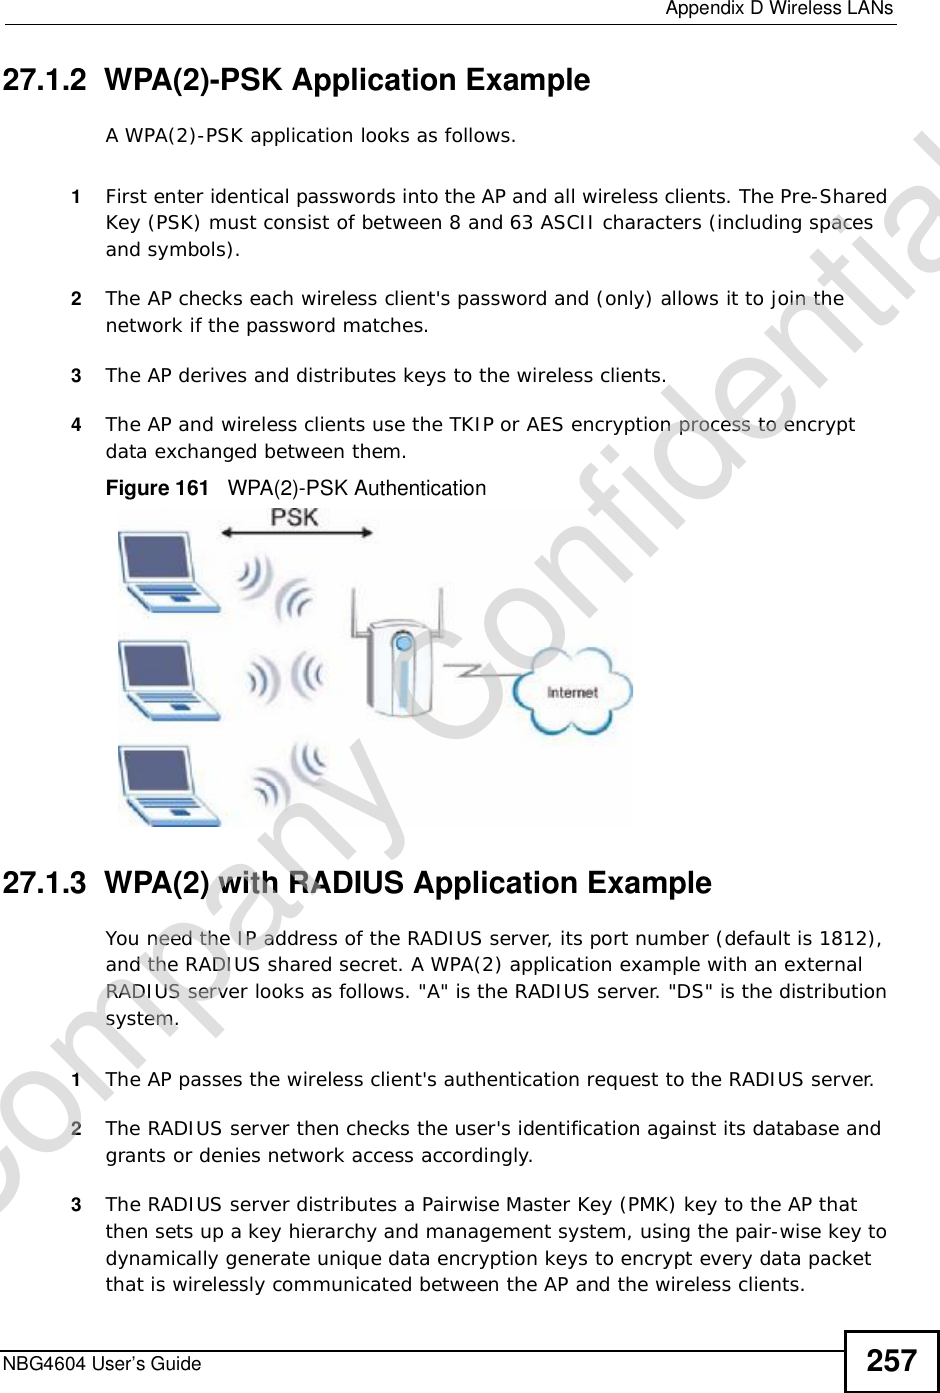  Appendix DWireless LANsNBG4604 User’s Guide 25727.1.2  WPA(2)-PSK Application ExampleA WPA(2)-PSK application looks as follows.1First enter identical passwords into the AP and all wireless clients. The Pre-Shared Key (PSK) must consist of between 8 and 63 ASCII characters (including spaces and symbols).2The AP checks each wireless client&apos;s password and (only) allows it to join the network if the password matches.3The AP derives and distributes keys to the wireless clients.4The AP and wireless clients use the TKIP or AES encryption process to encrypt data exchanged between them.Figure 161   WPA(2)-PSK Authentication27.1.3  WPA(2) with RADIUS Application ExampleYou need the IP address of the RADIUS server, its port number (default is 1812), and the RADIUS shared secret. A WPA(2) application example with an external RADIUS server looks as follows. &quot;A&quot; is the RADIUS server. &quot;DS&quot; is the distribution system.1The AP passes the wireless client&apos;s authentication request to the RADIUS server.2The RADIUS server then checks the user&apos;s identification against its database and grants or denies network access accordingly.3The RADIUS server distributes a Pairwise Master Key (PMK) key to the AP that then sets up a key hierarchy and management system, using the pair-wise key to dynamically generate unique data encryption keys to encrypt every data packet that is wirelessly communicated between the AP and the wireless clients. Company Confidential